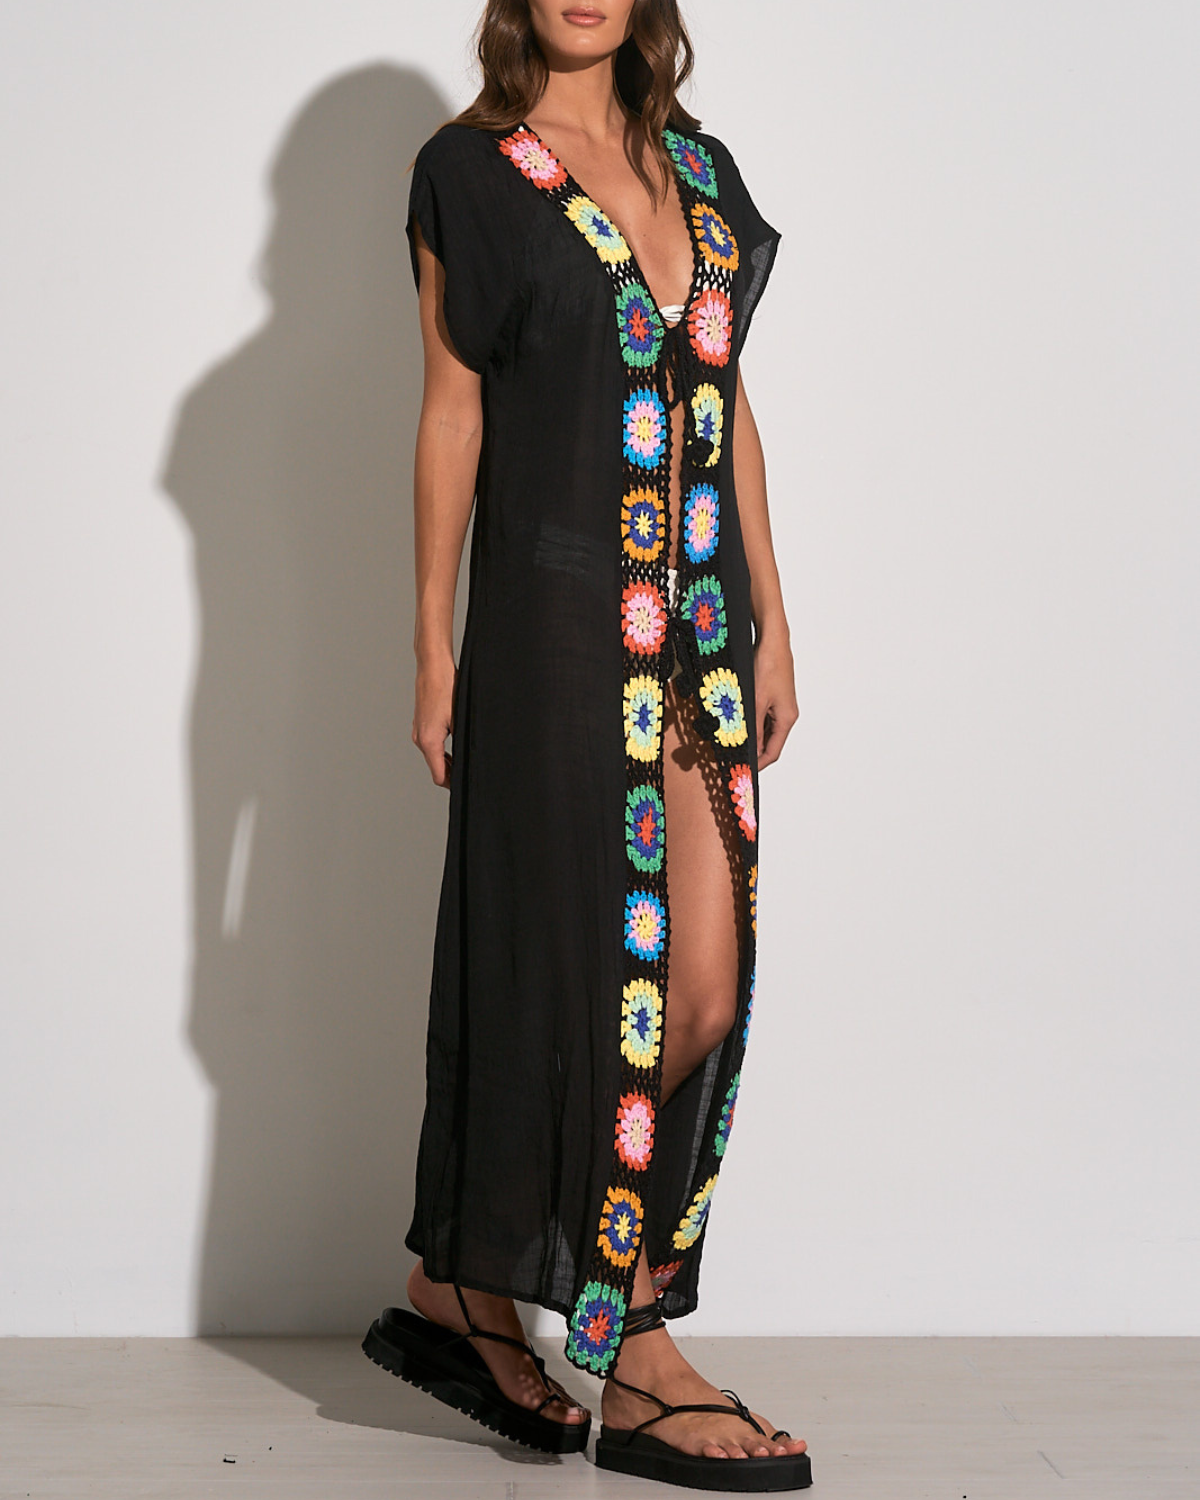 Model wearing a maxi length short sleeve kimono cover up with square crochet detail in black, green, yellow, blue, and orange